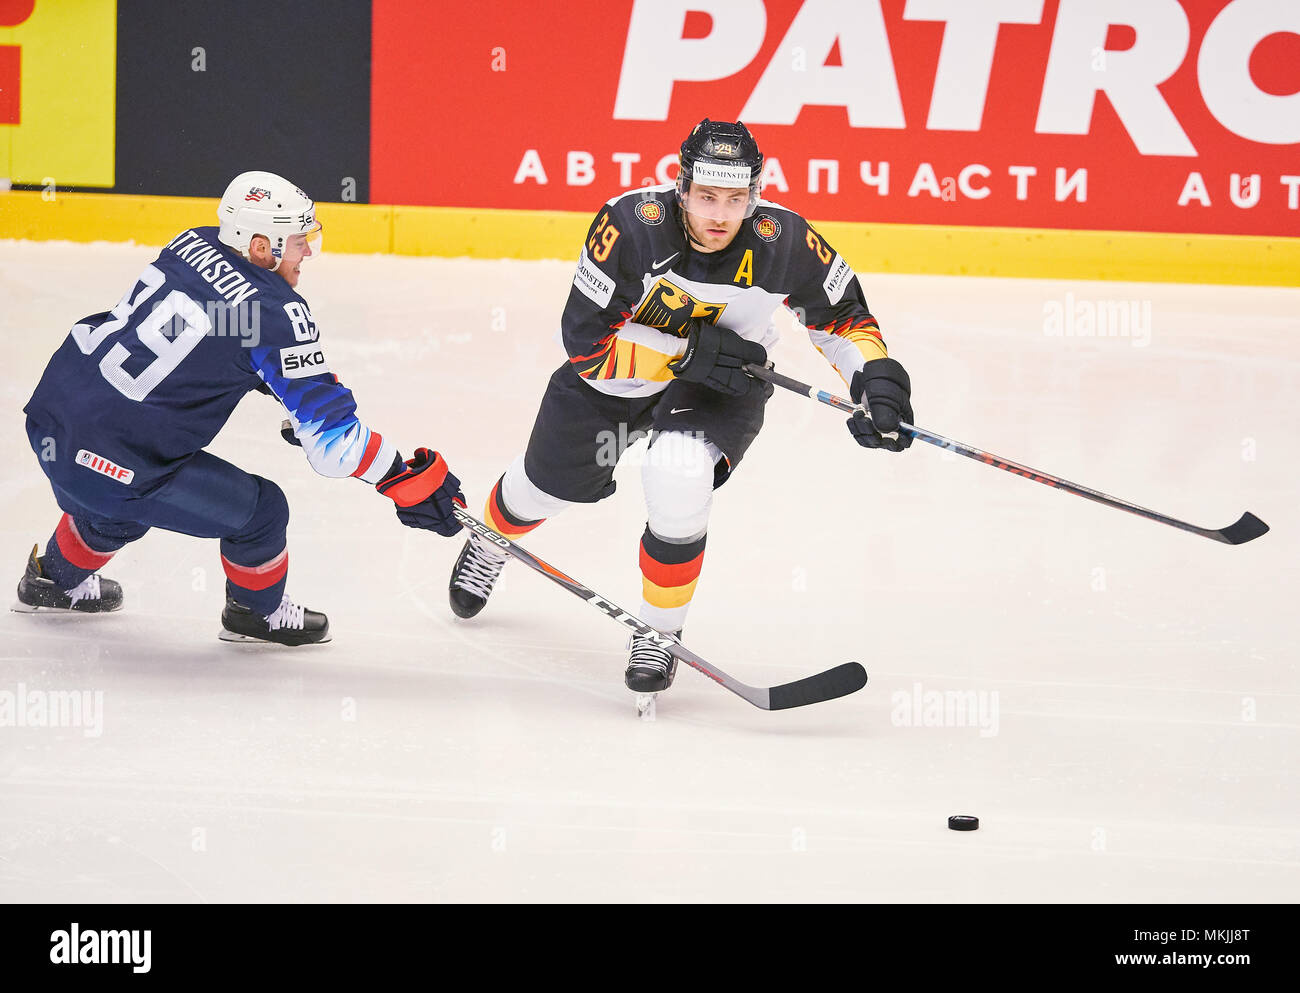 Ice Hockey World Cup 2018, Herning, May 07, 2018 NHL Pro Leon DRAISAITL, DEB 29 against